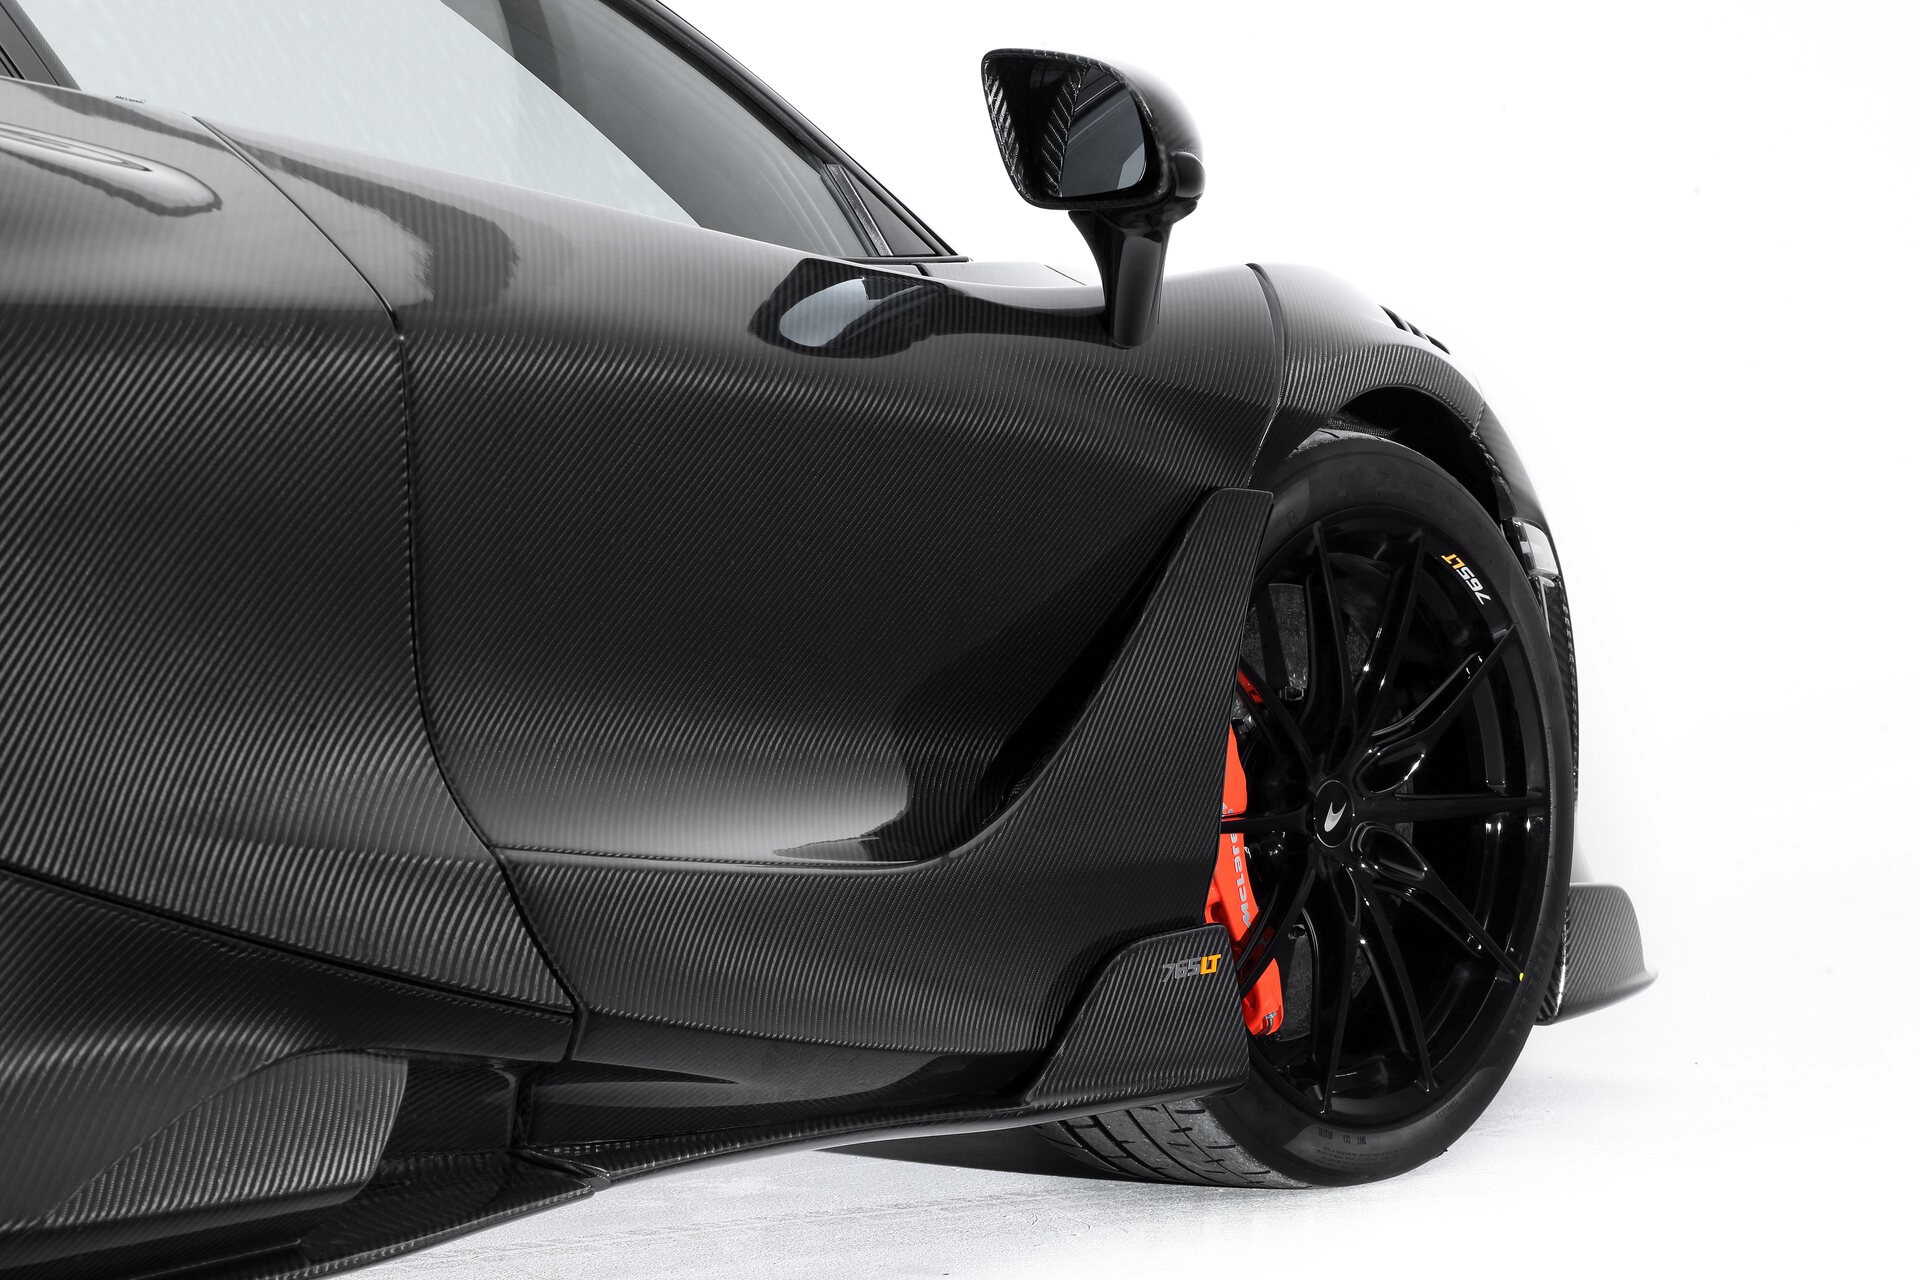 Check our price and buy Topcar Design body kit for McLaren 765 LT Coupe Carbon Edition!